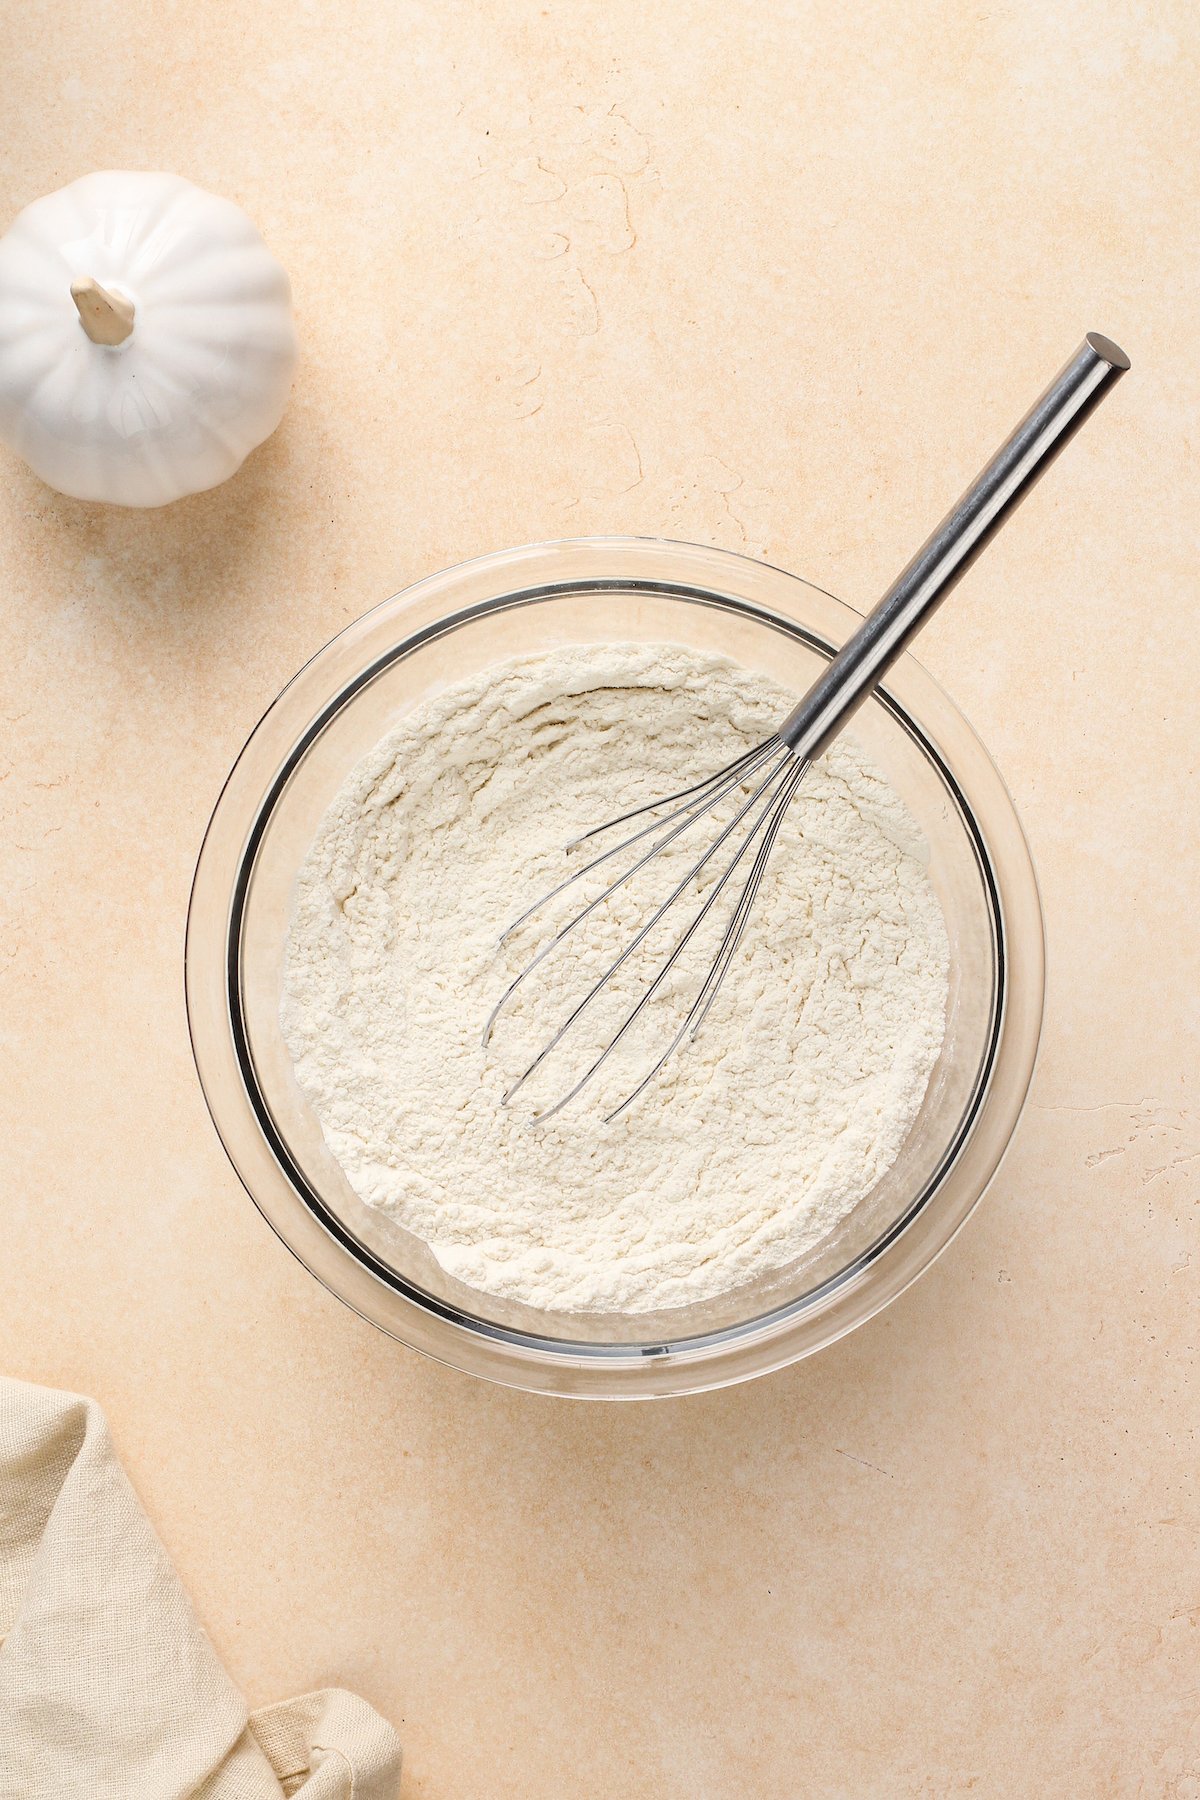 Dry sugar cookie ingredients in a mixing bowl with a whisk.